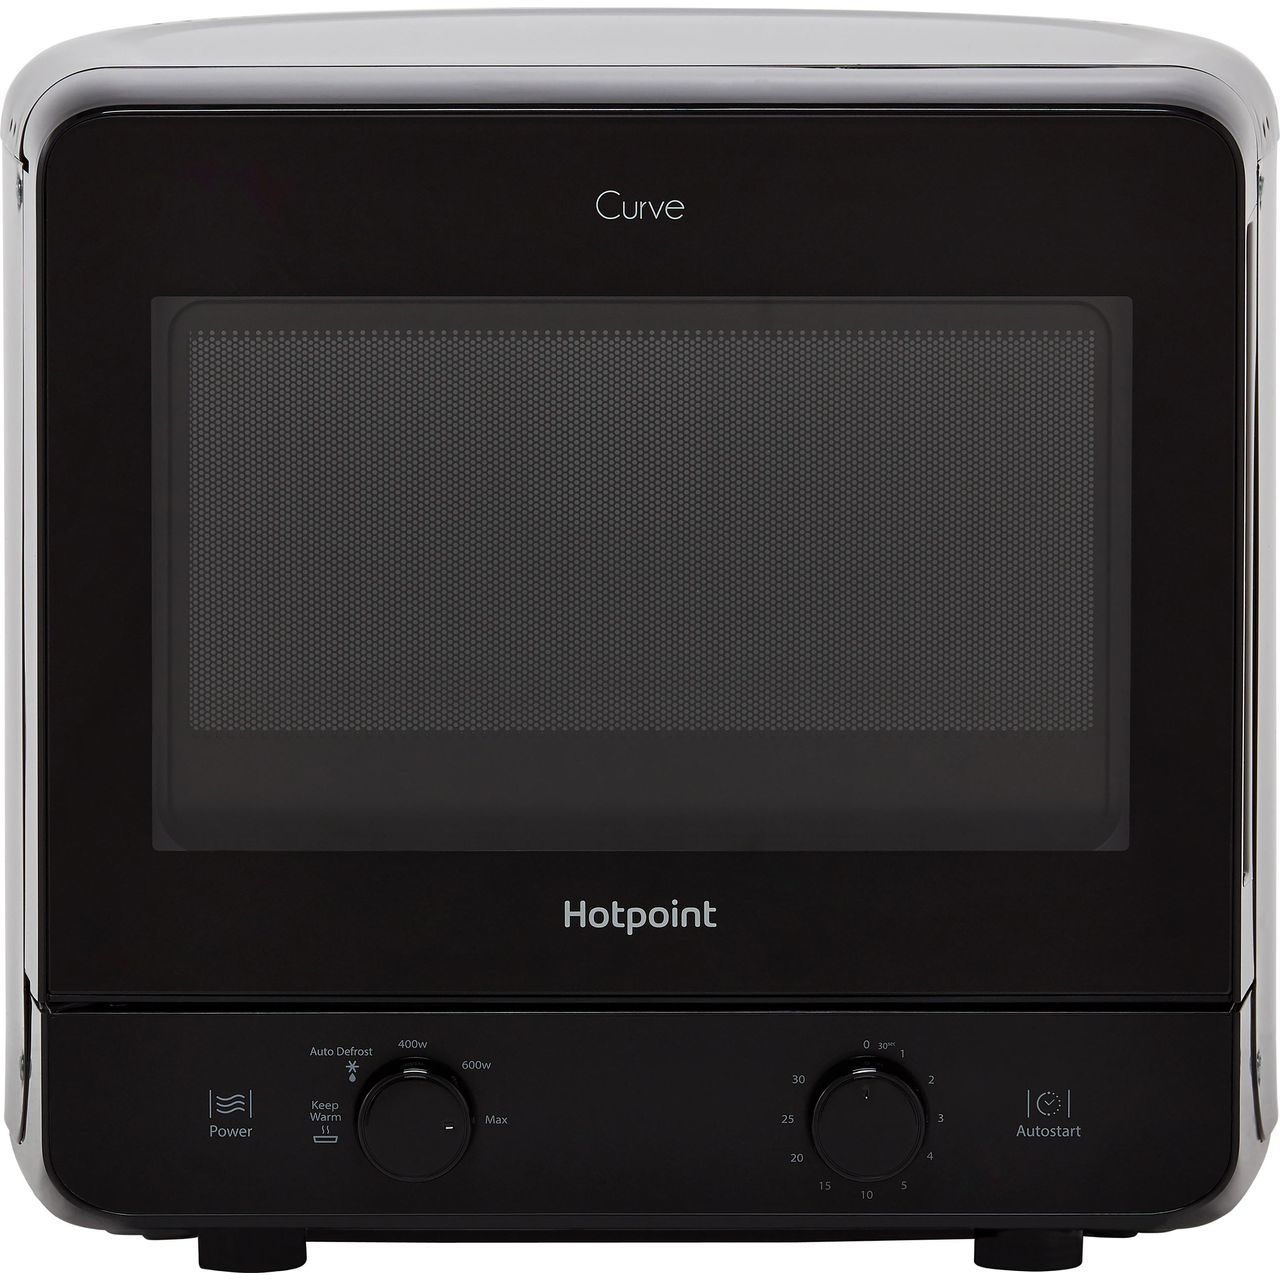 700 W Hotpoint MWH 1311 B Curve Solo Microwave with Dial Control Black 13 Litre